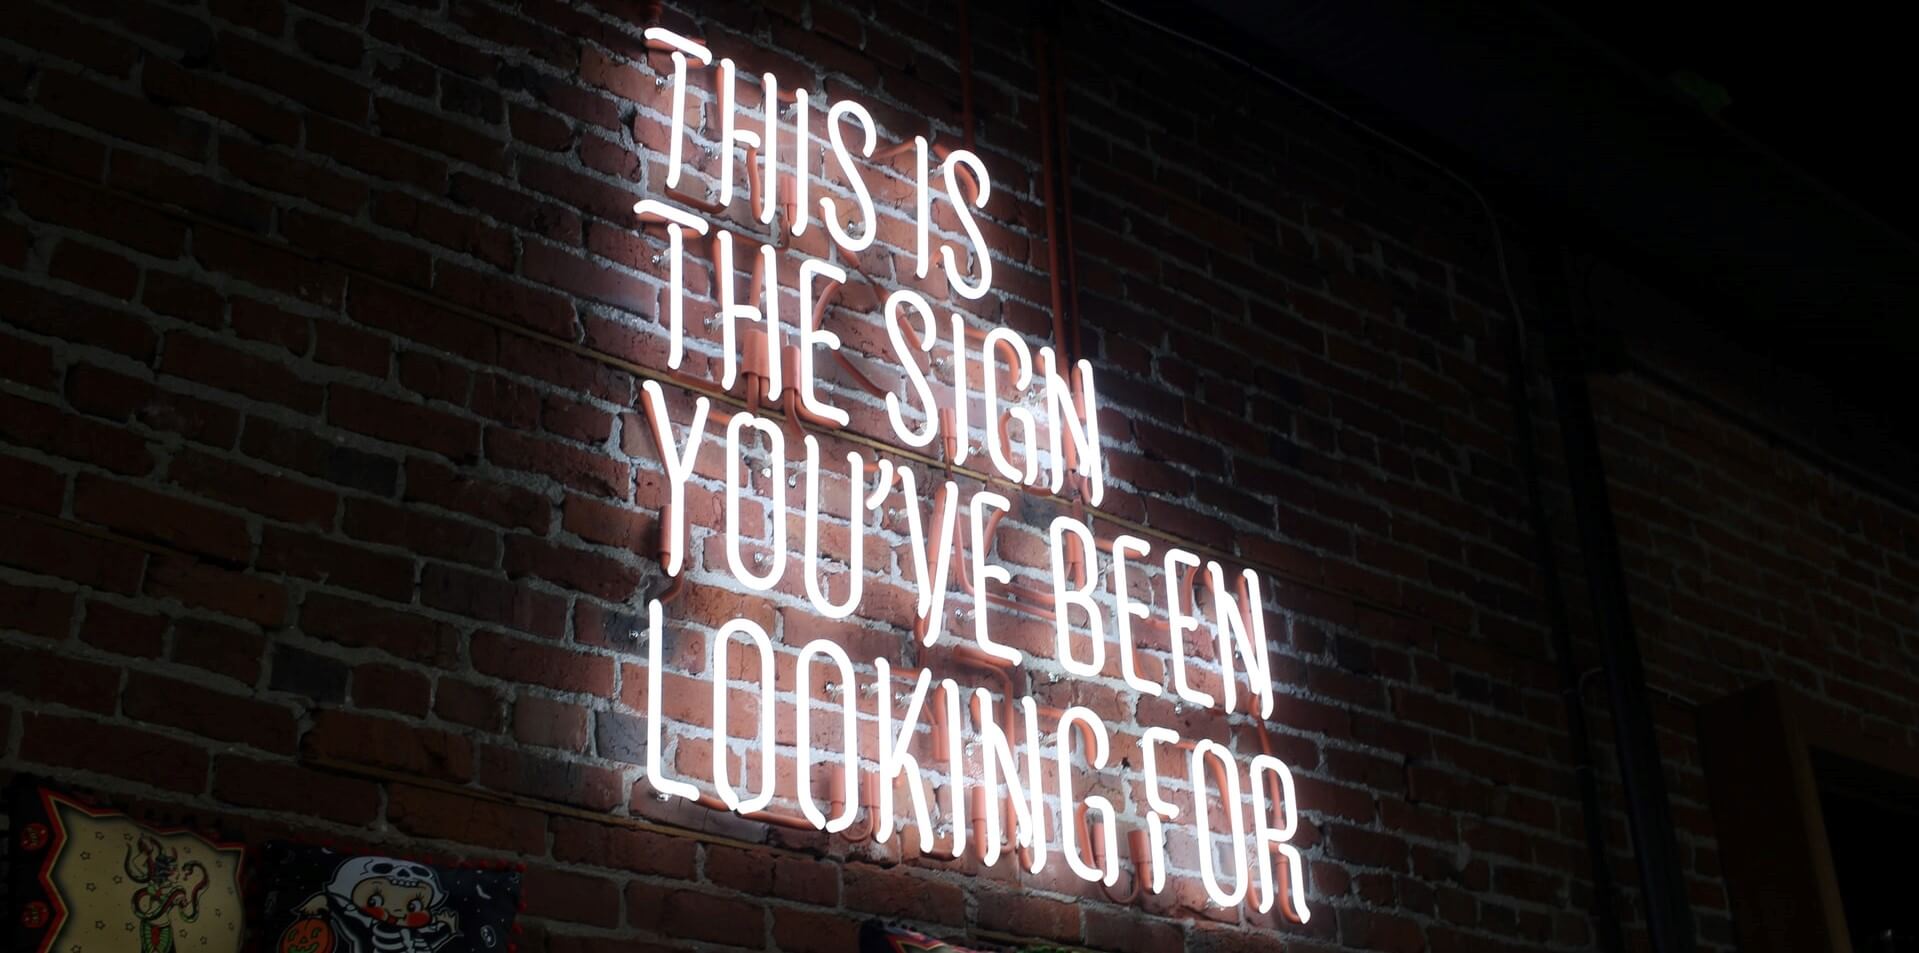 "This is the sign you've been looking for" white neon sign on brick wall